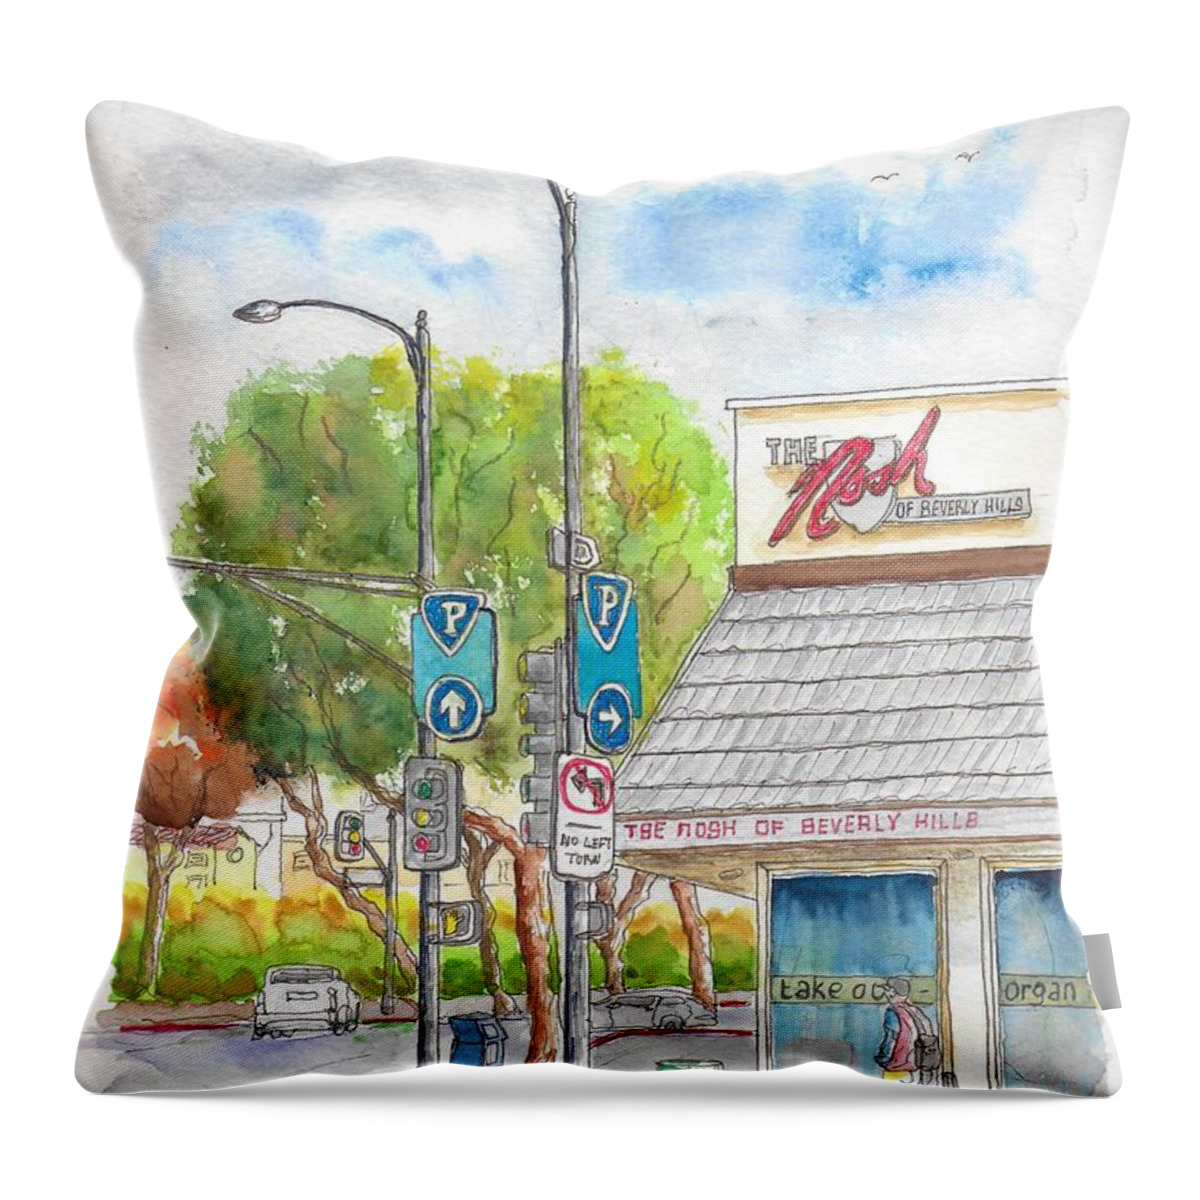 The Nosh Of Beverly Hills Throw Pillow featuring the painting The Nosh of Beverly Hills, Little Santa Monica and Roxbury, Beverly Hills, California by Carlos G Groppa